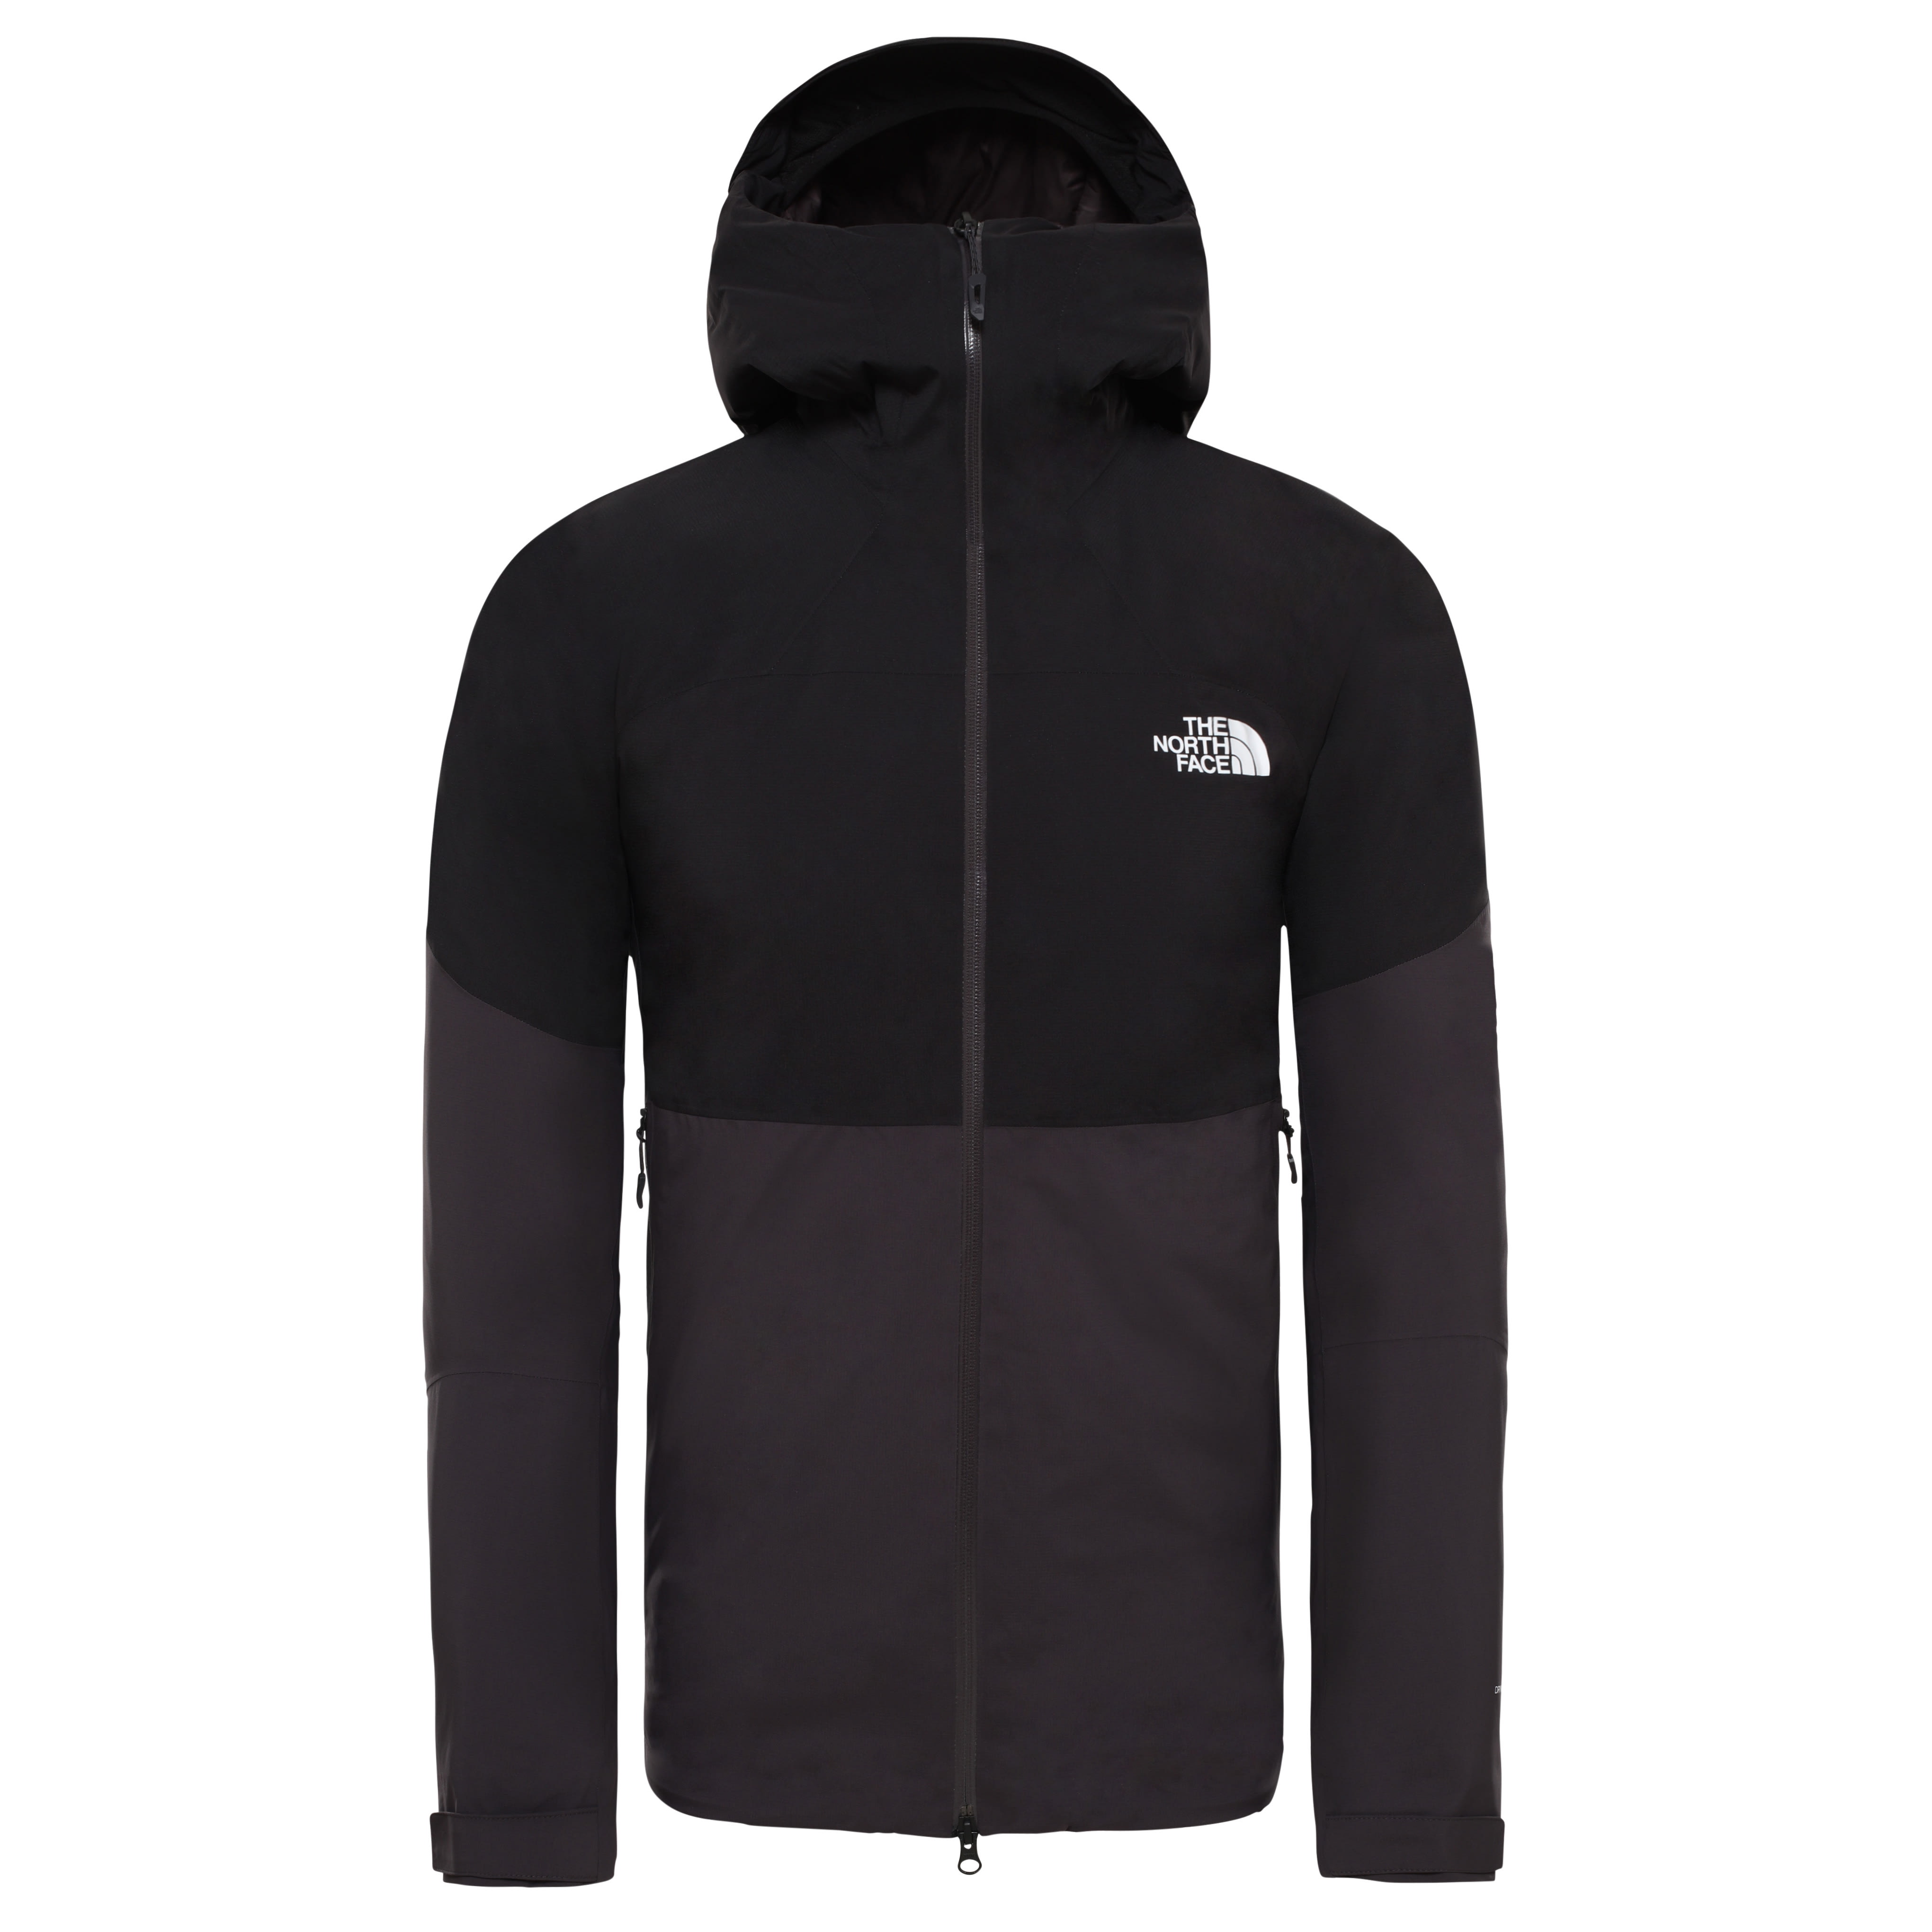 Impendor Insulated Jacket from Outnorth